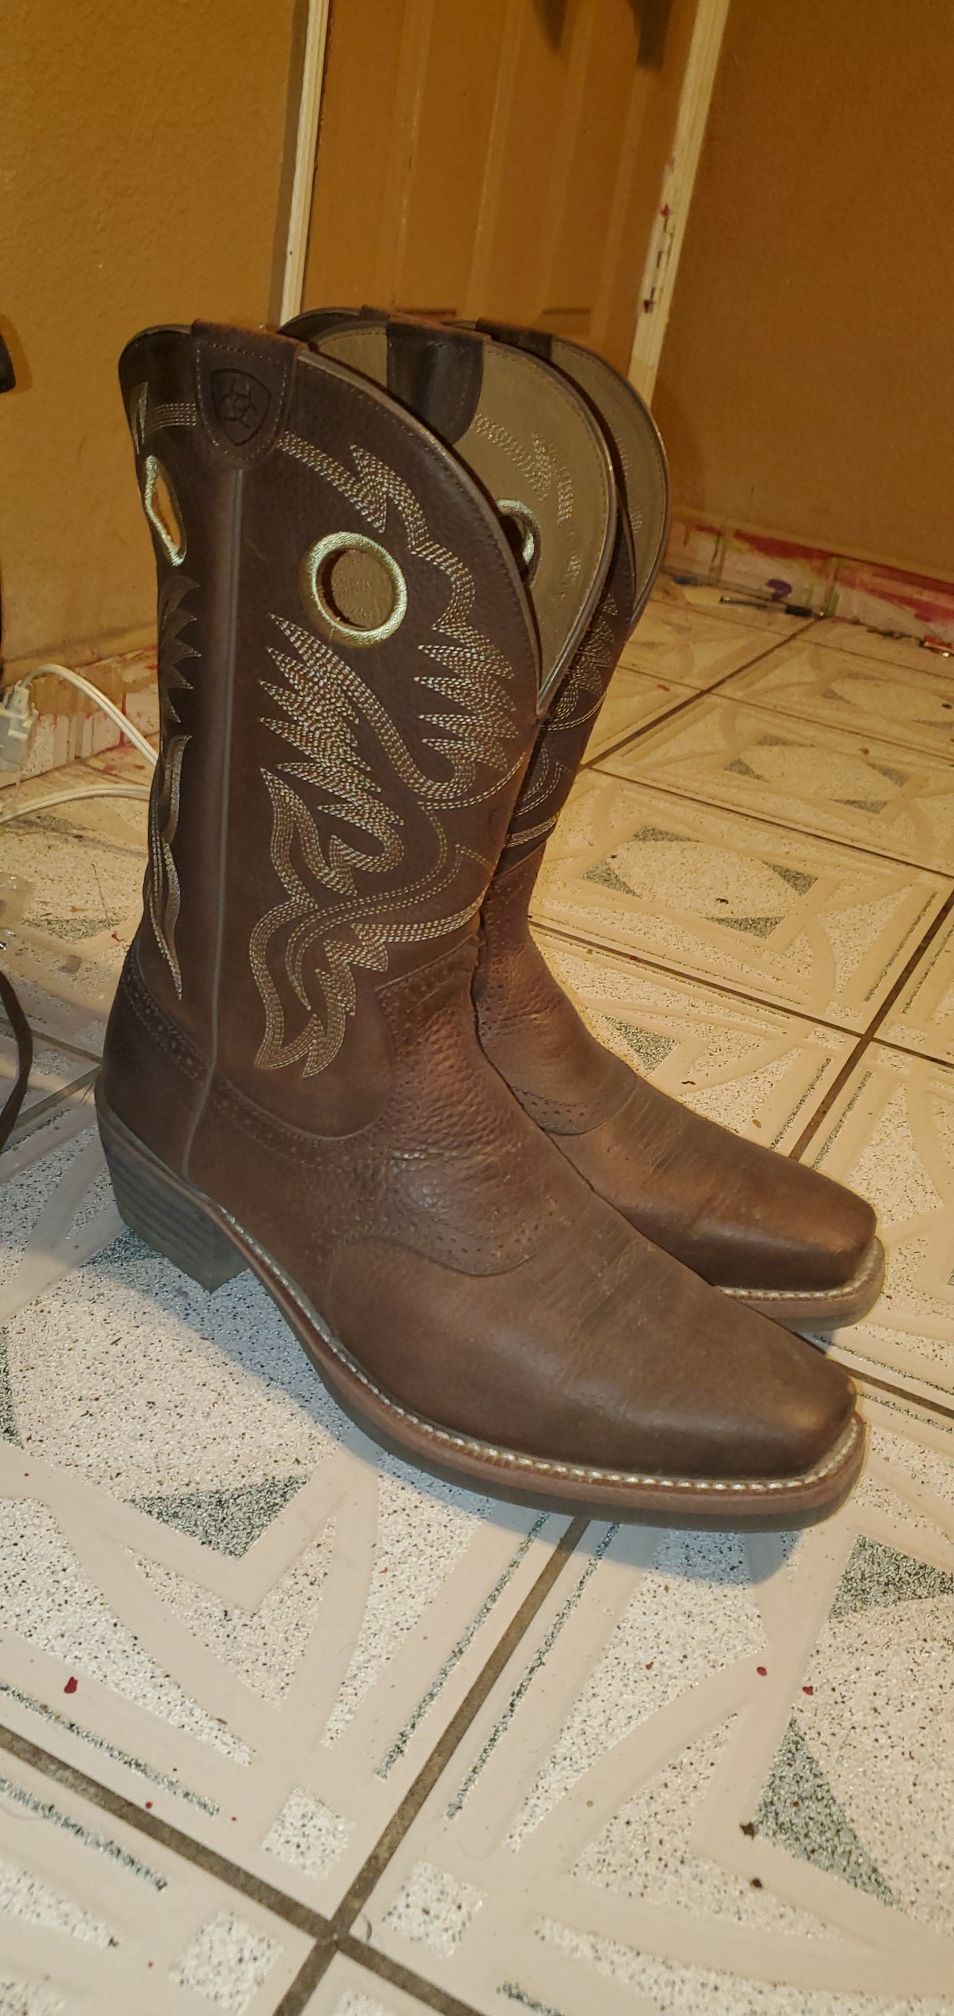 Ariat pro boots